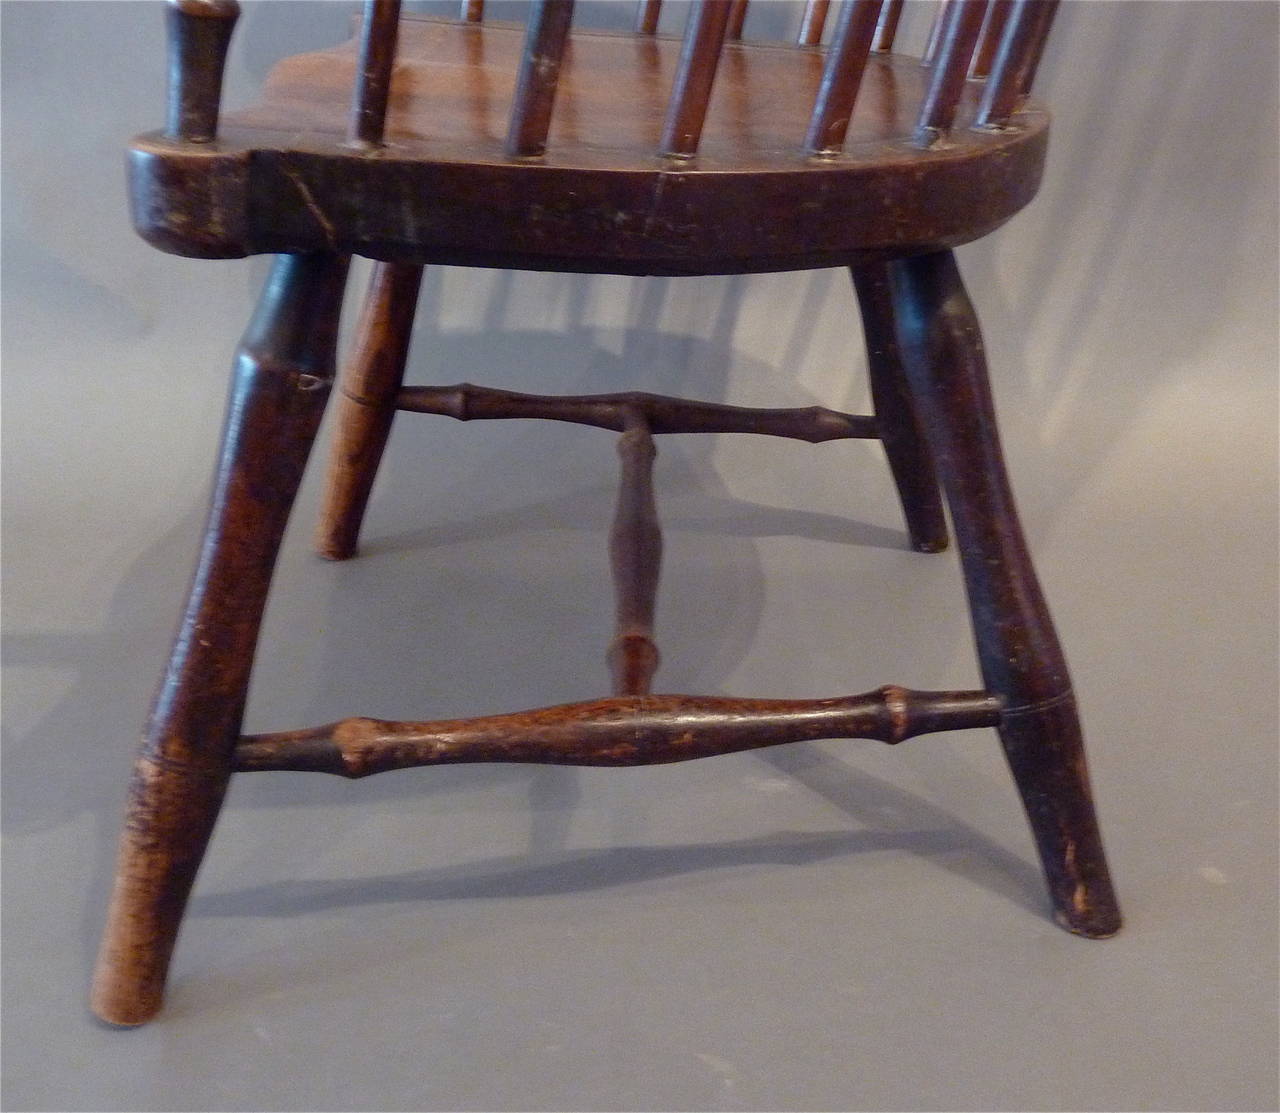 Rustic 18th Century English “Comb-Back” Windsor Armchair